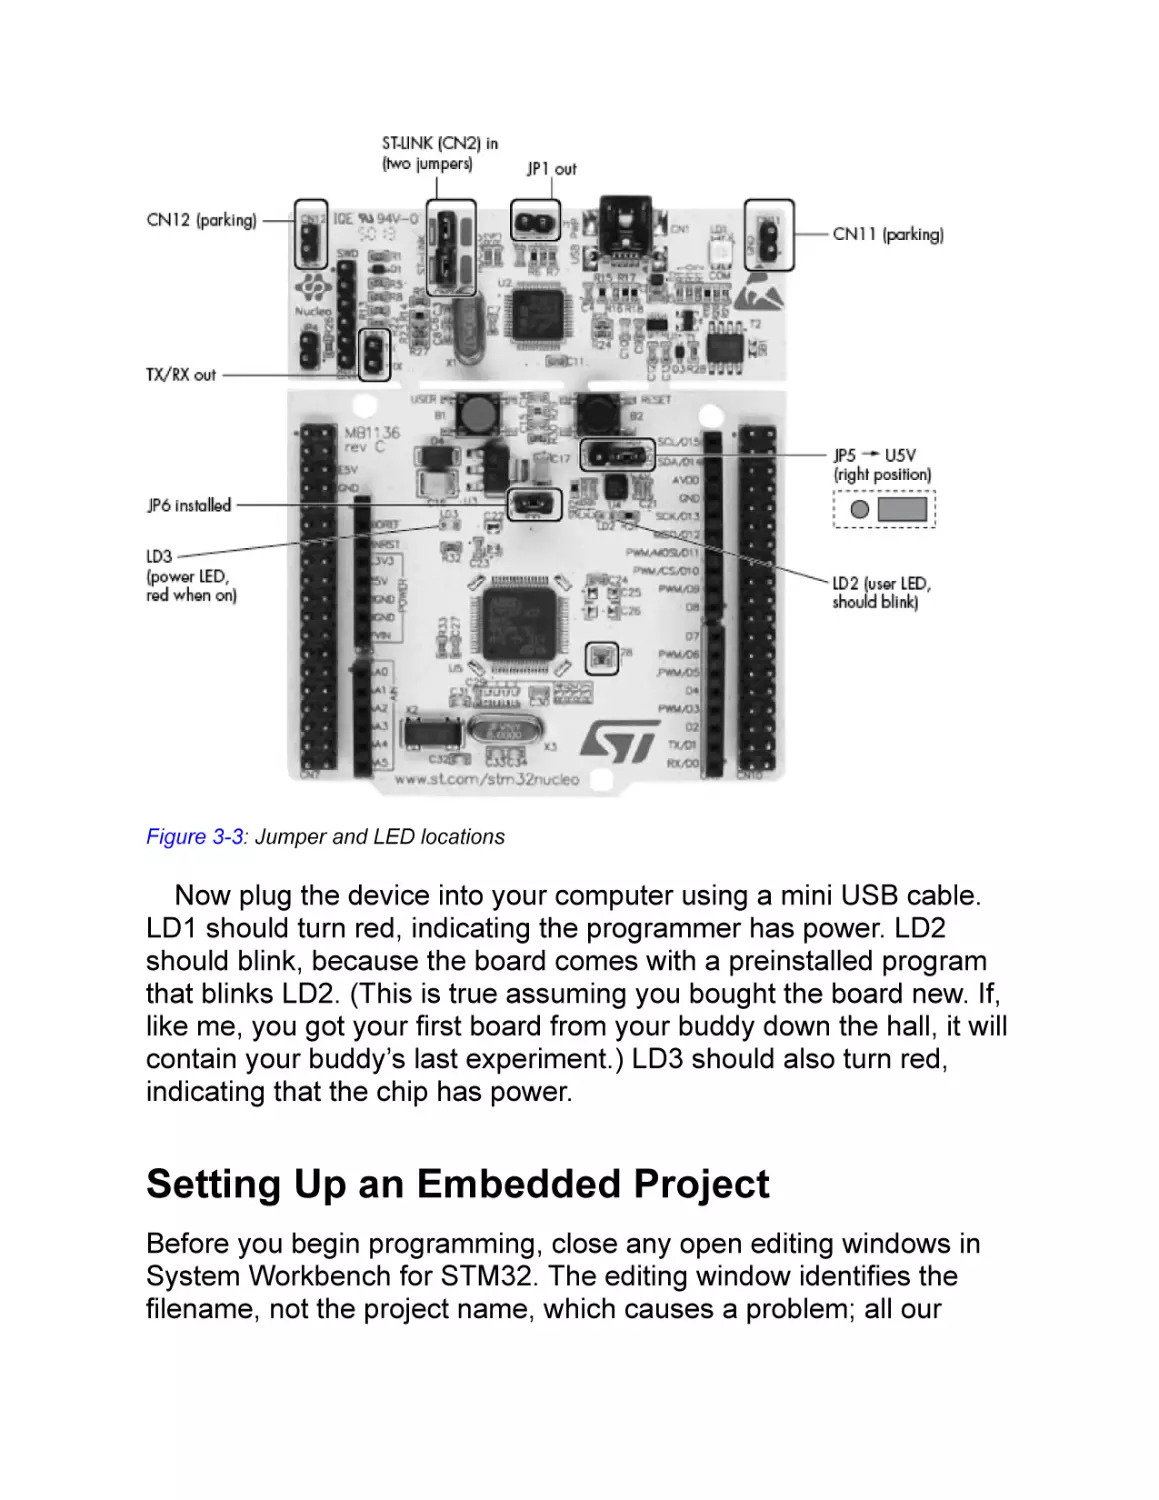 Setting Up an Embedded Project